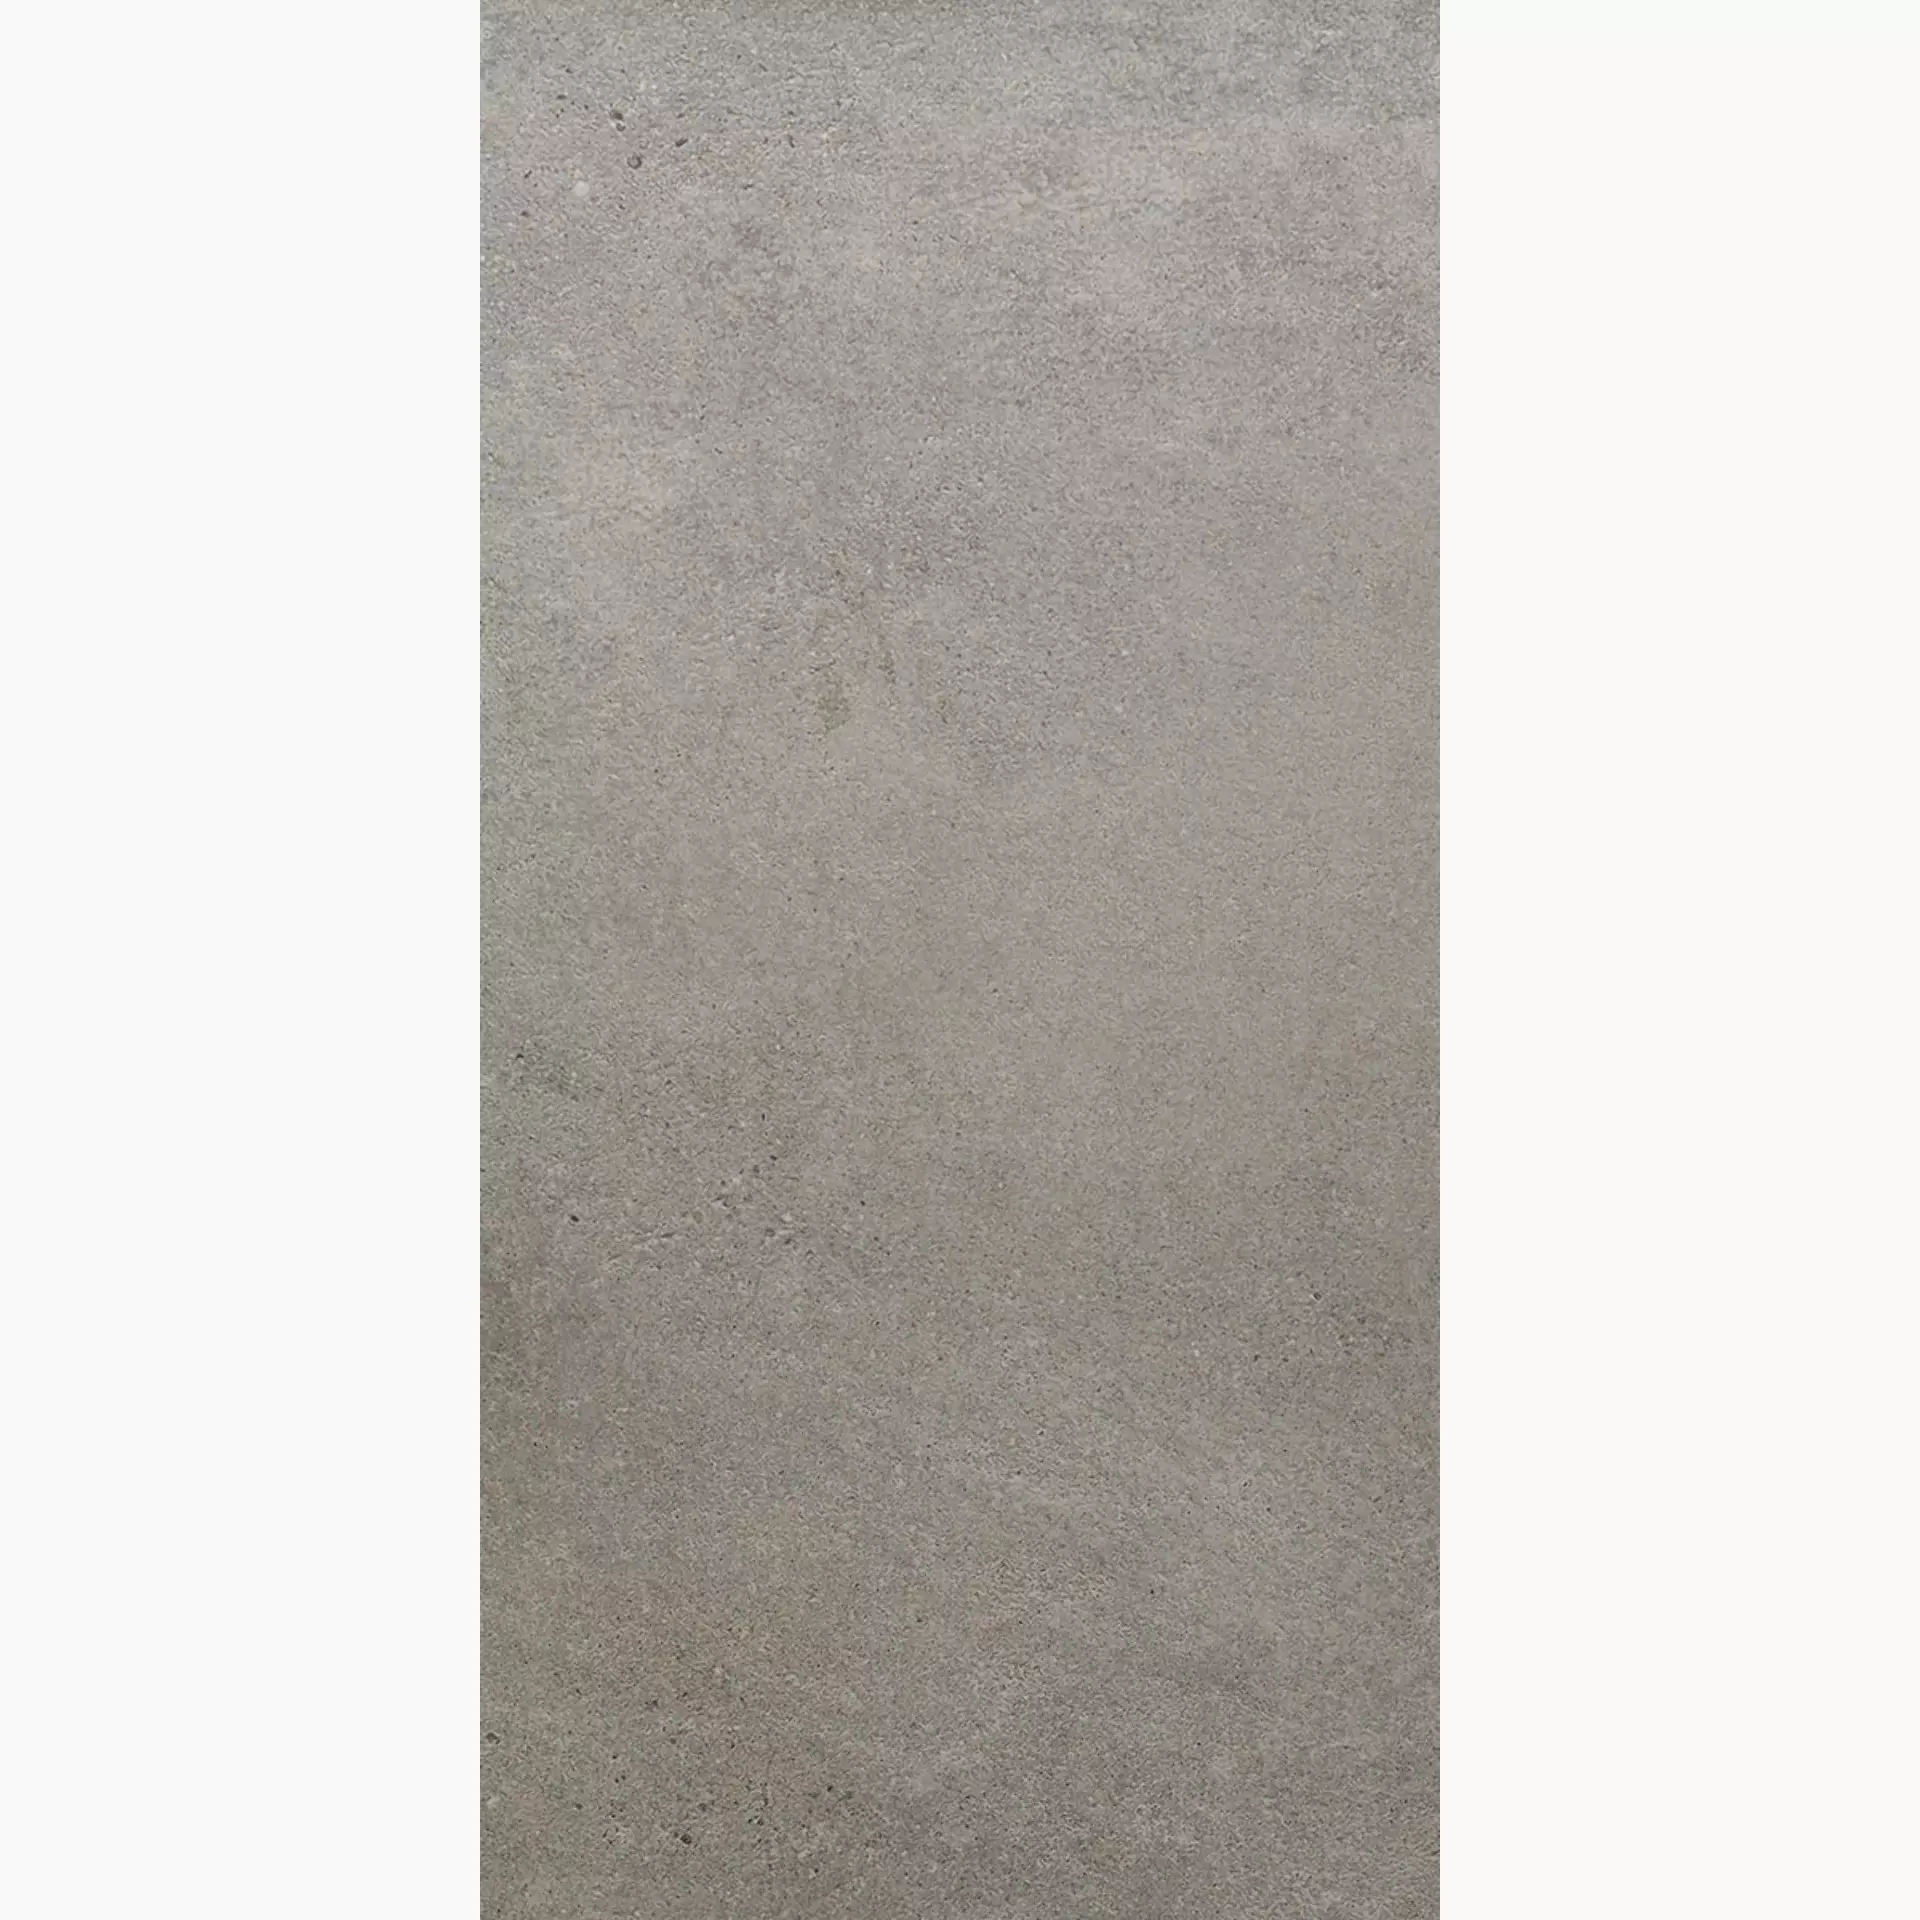 Rondine Loft Taupe Naturale J89075 40x80cm rectified 8,5mm